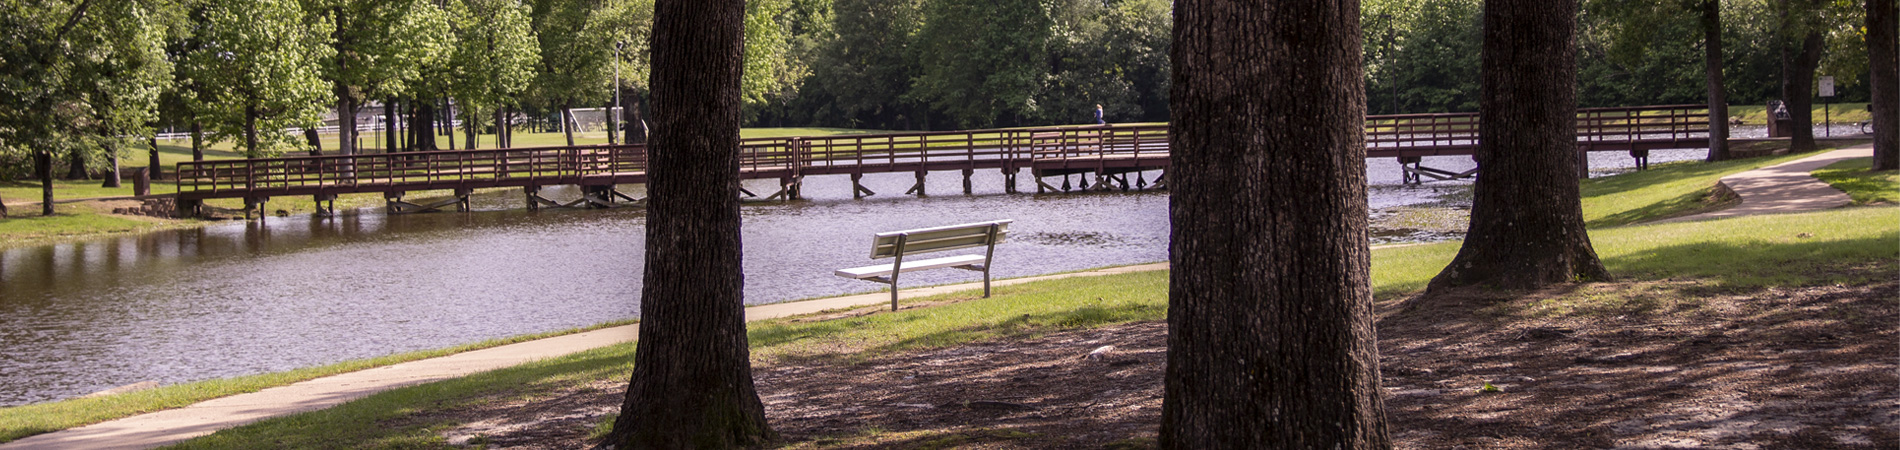 Bench Overlooking Lake at Heritage Park